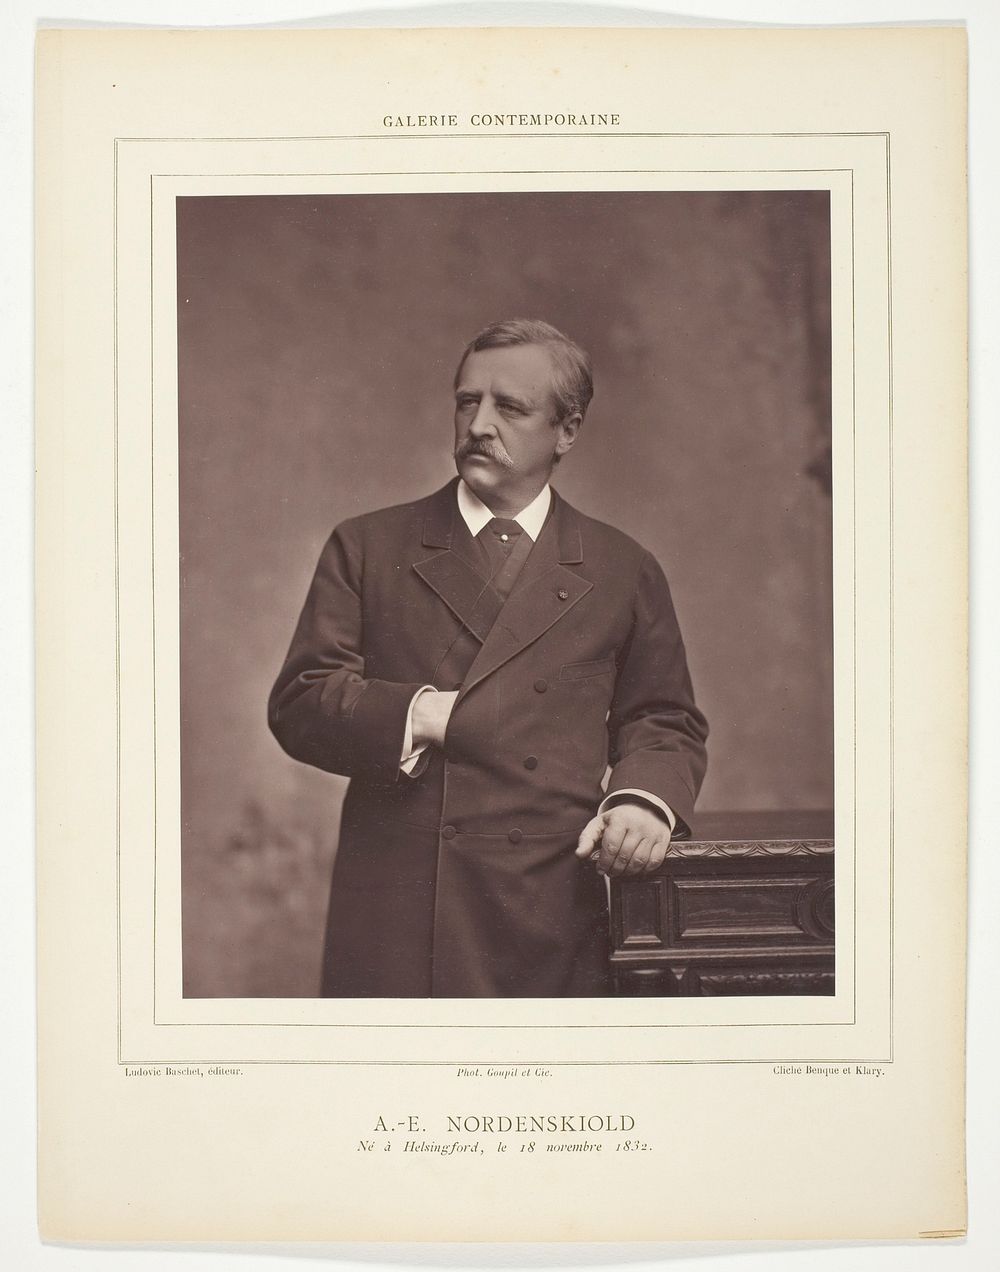 A. E. Nordenskiold (Swedish geologist and mineralogist, born Finland, 1832-1901) by Benque et Klary